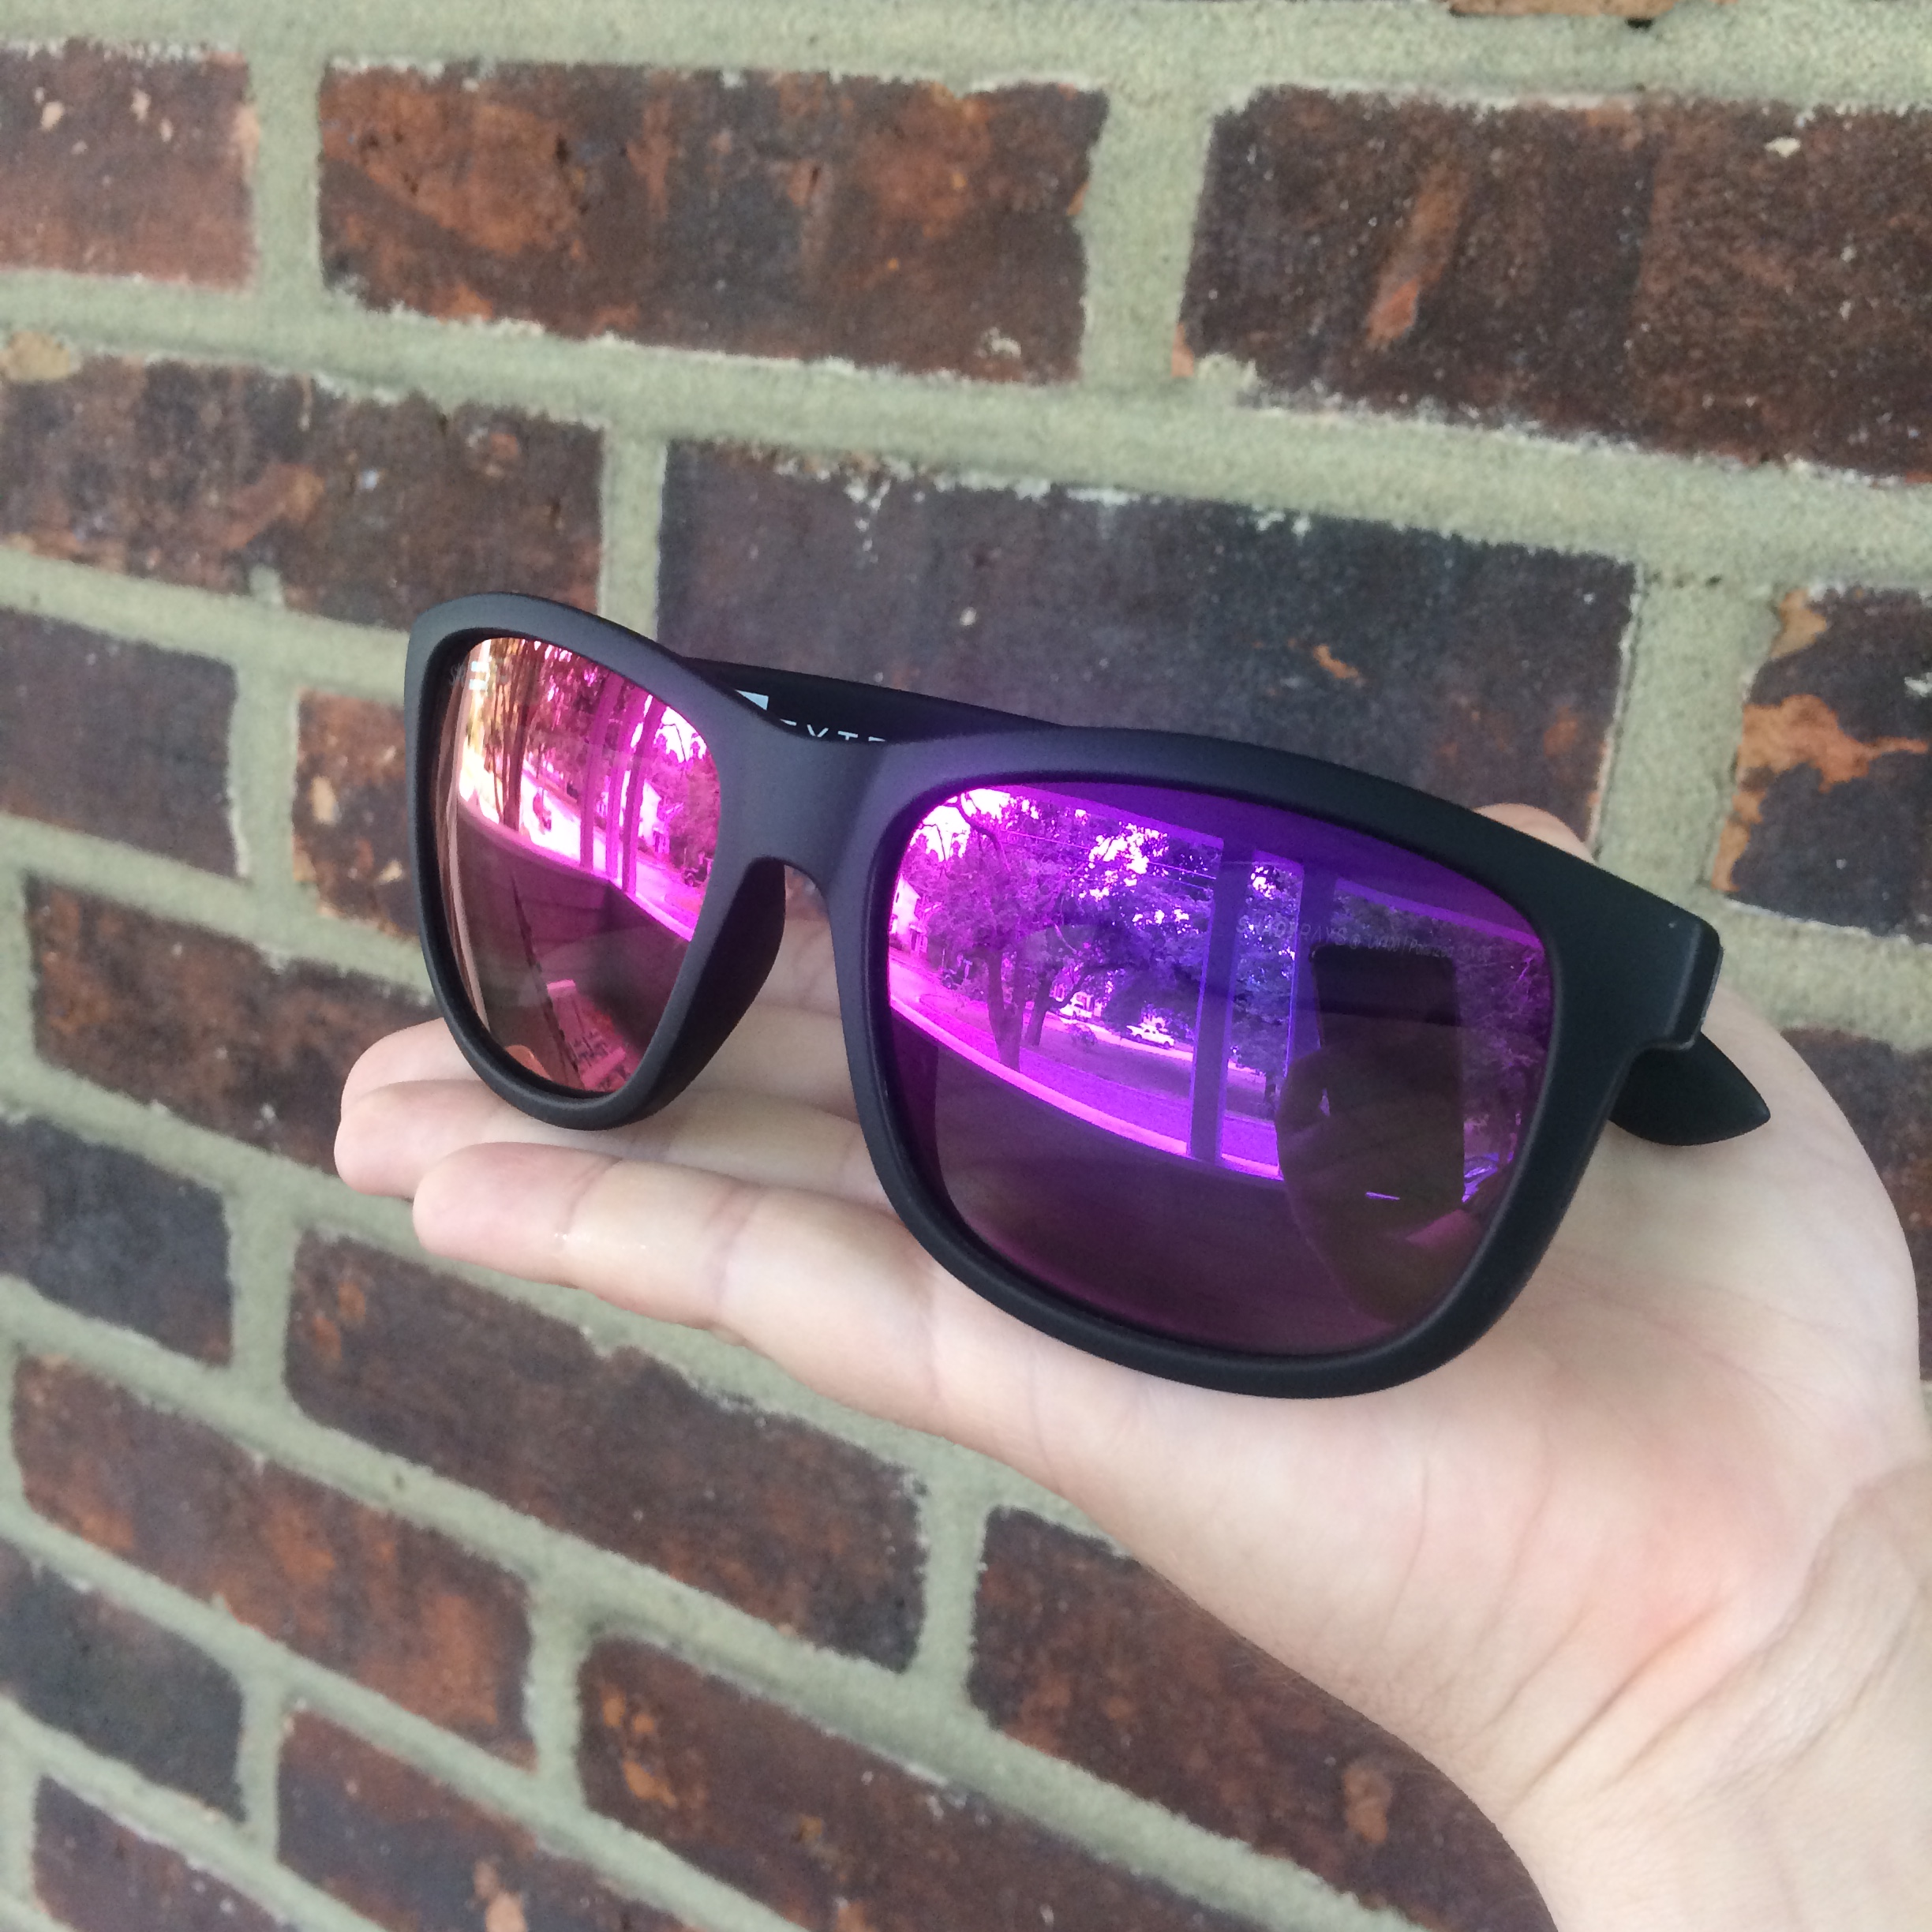 National Sunglasses Day: A review of the Shady Rays Signature Series ...